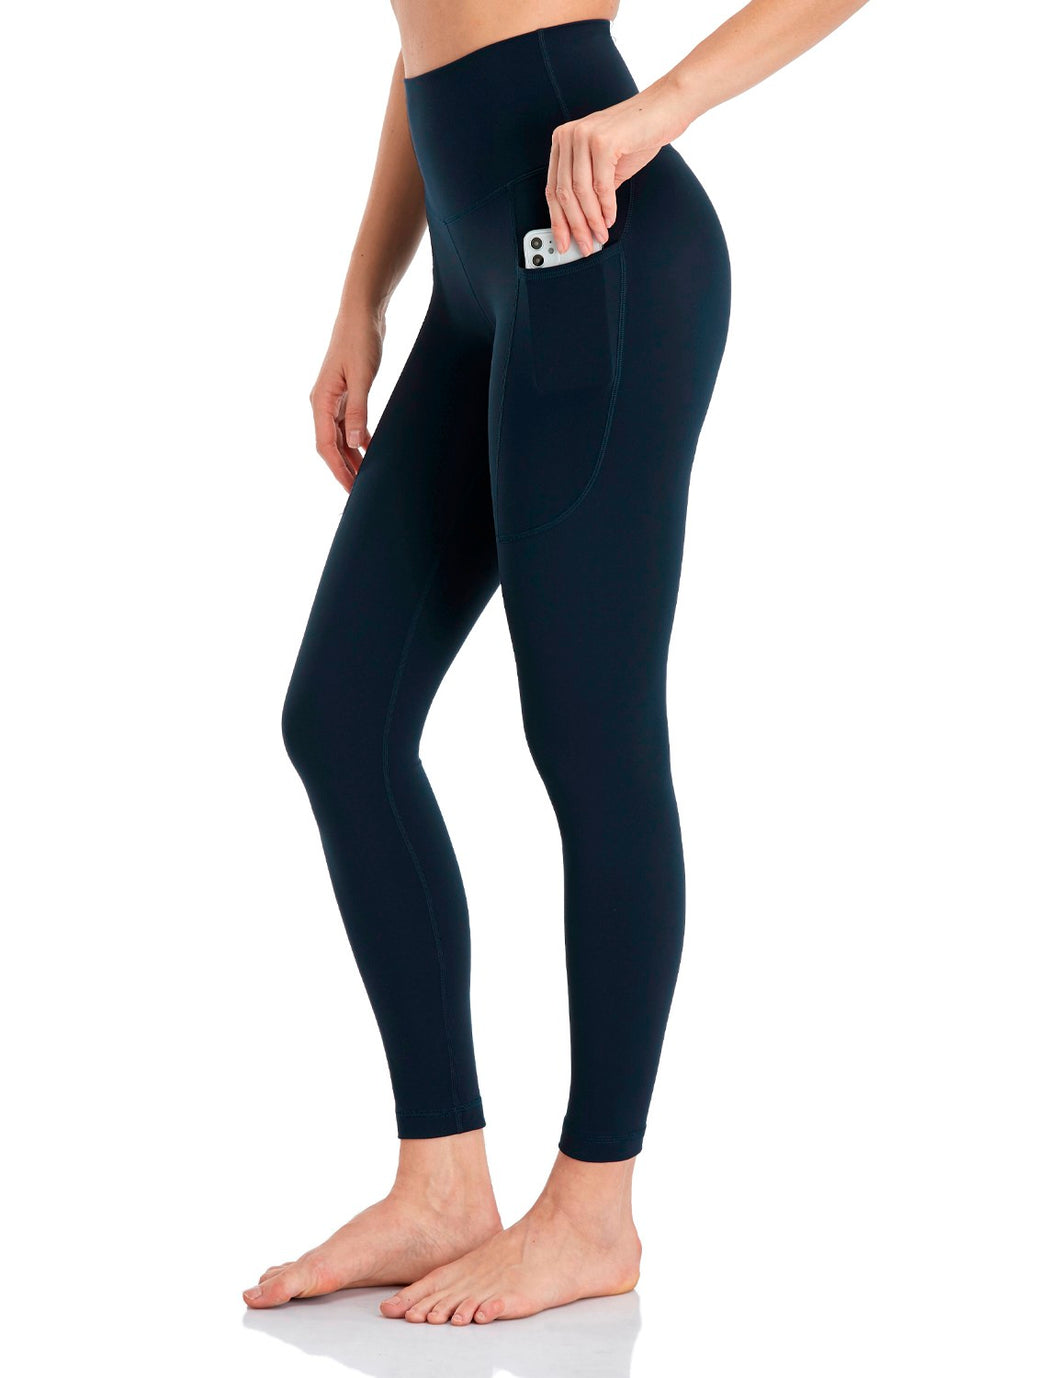 HeyNuts Essential 78 Leggings with Side Pockets for Hong Kong